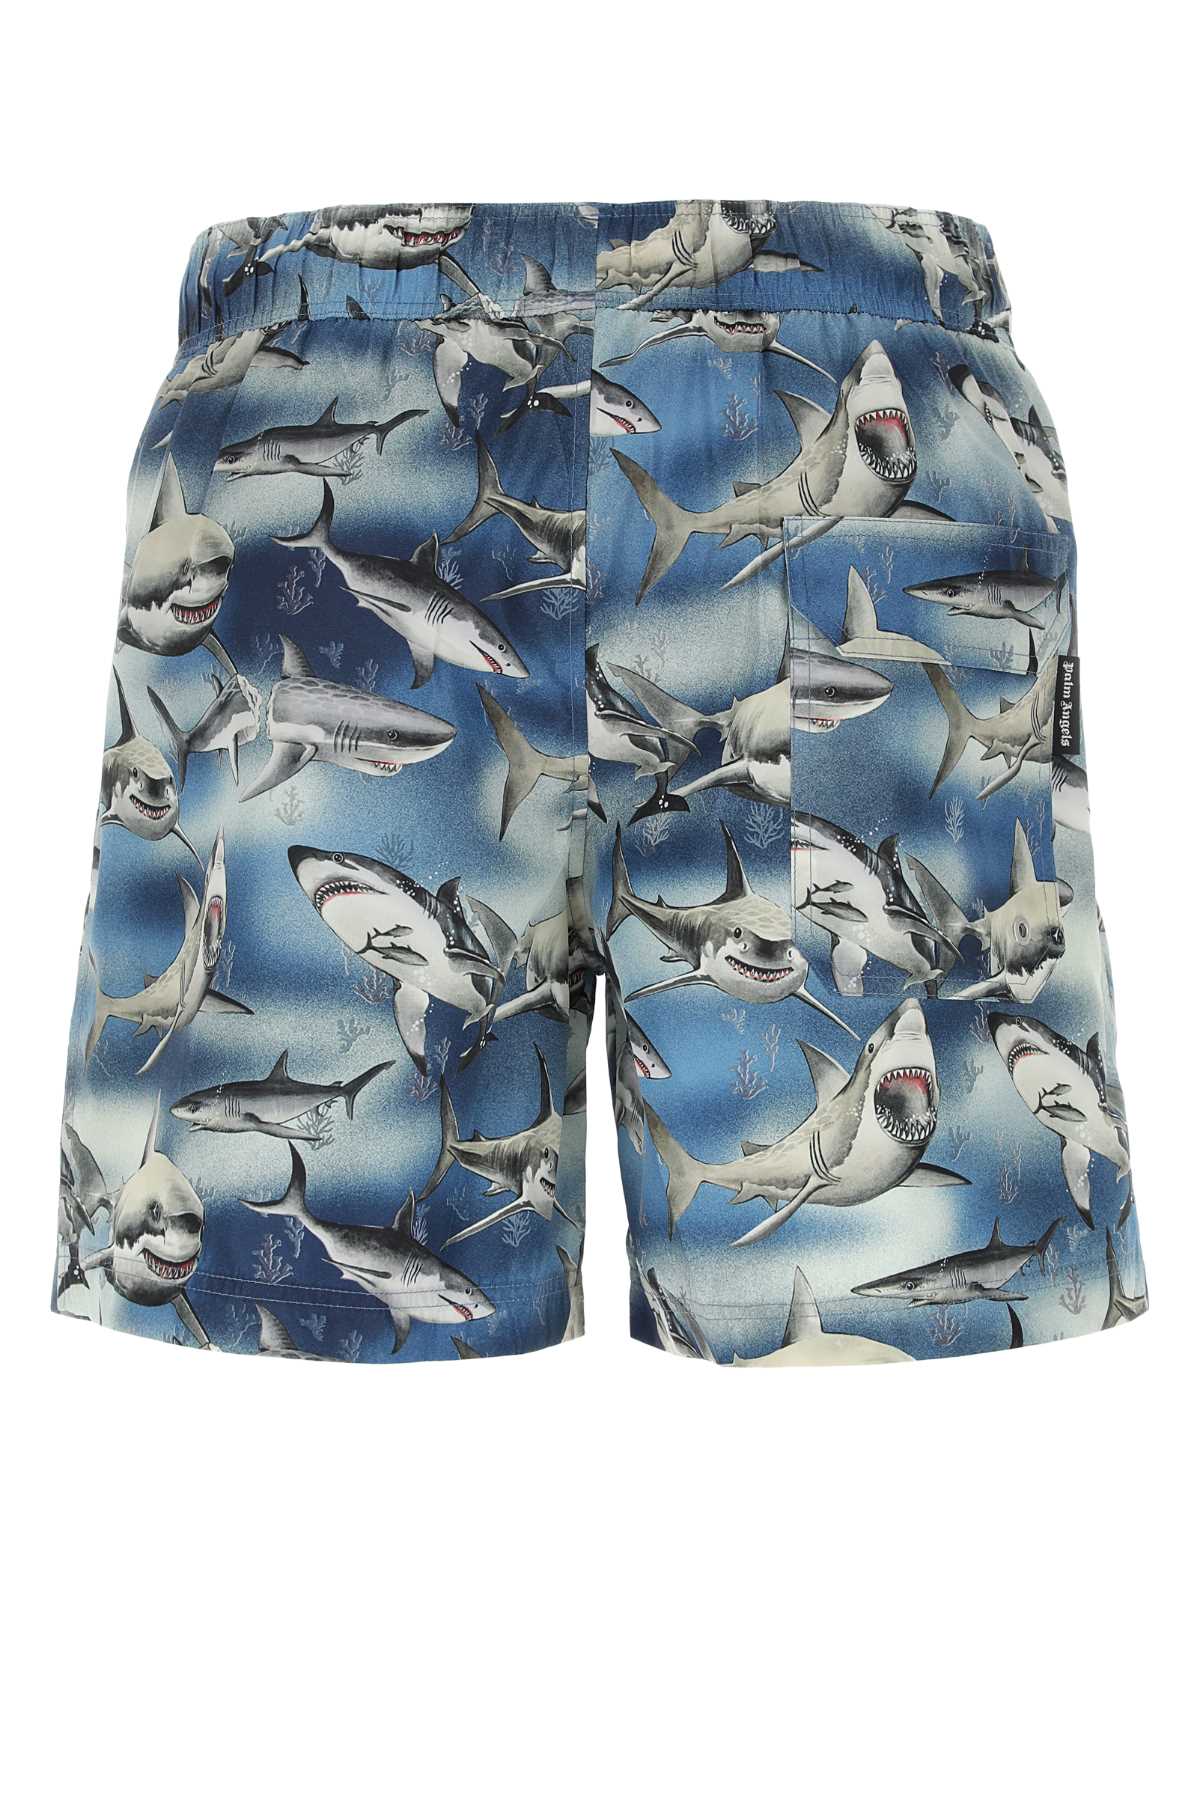 PALM ANGELS PRINTED POLYESTER SHARKS SWIMMING SHORTS